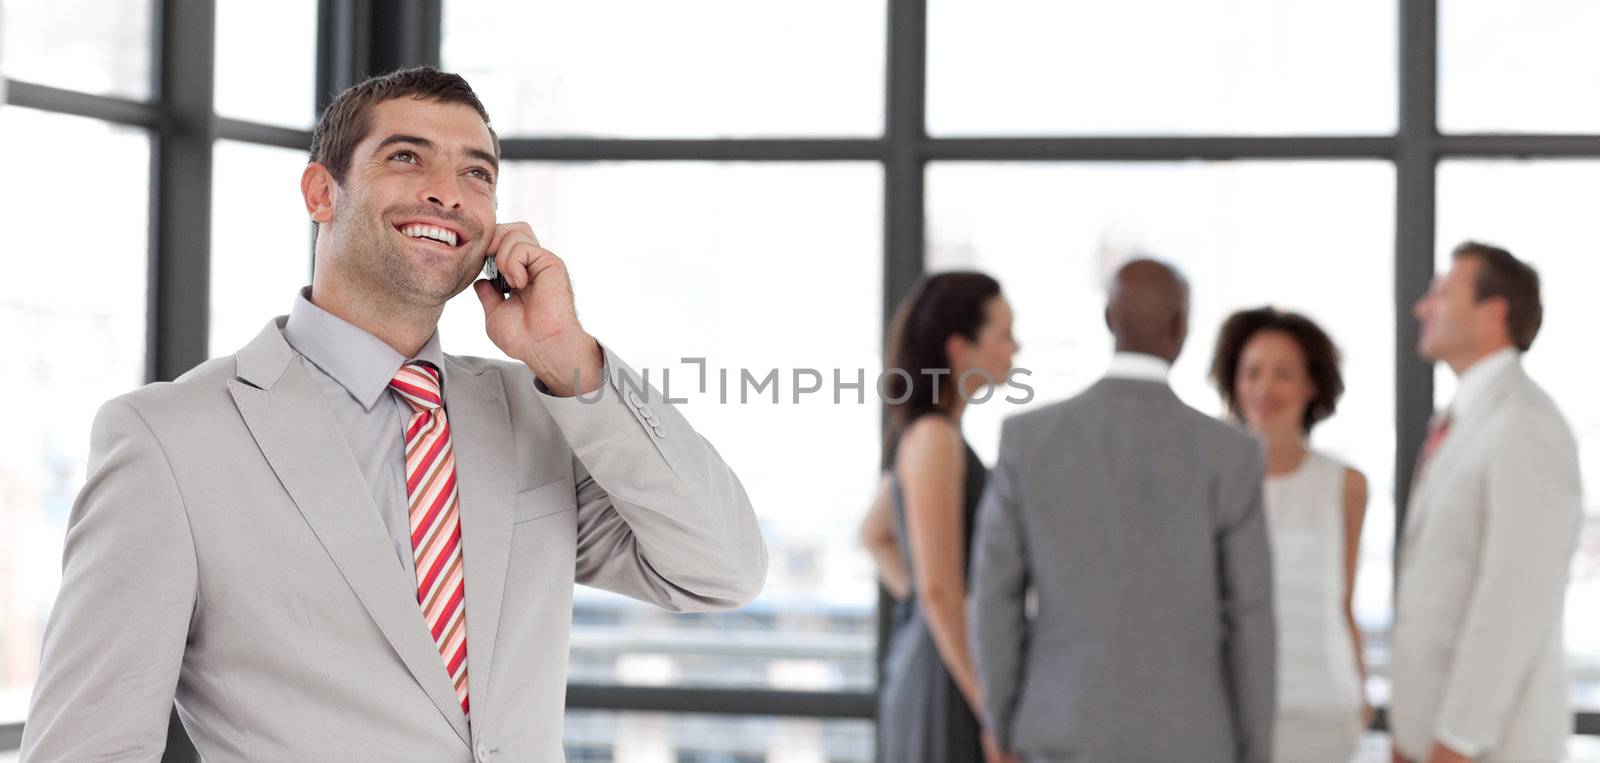 Charismatic businessman on phone in office with his team in the background 